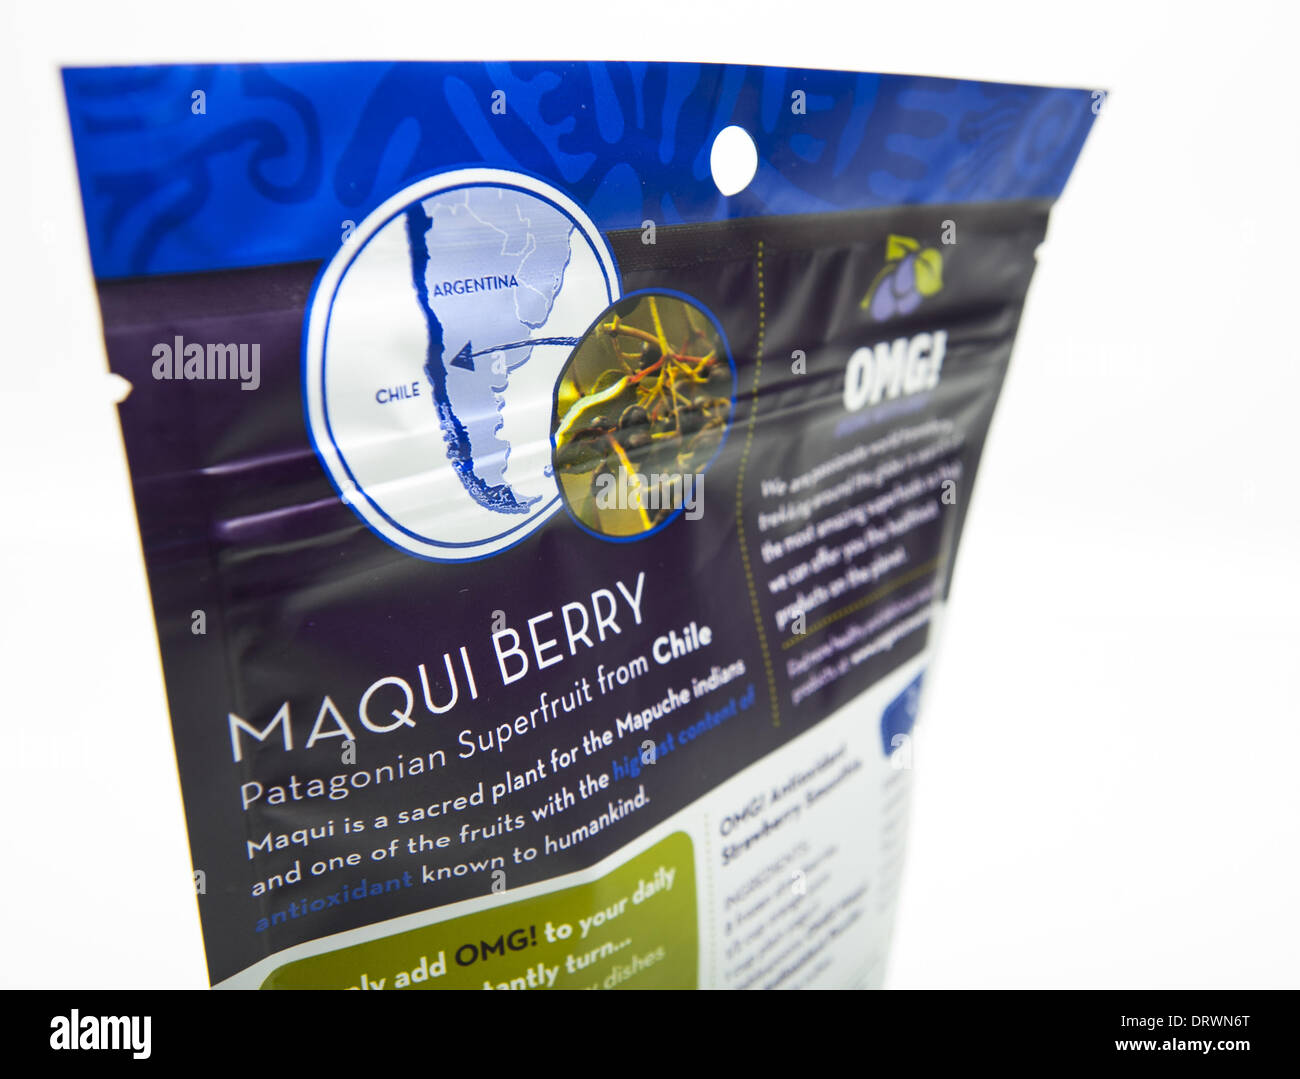 Jan. 31, 2014 - Chilean Patagoinia, Araucania/Chilean Patagoinia, CHILE - A bag of 5.5 ounce or 156 grams of Maqui powder produced by Organic Meets Good, (OMG) sells in stores for around $20 US dollars and is used as a dietary supplement in beverages like smoothies and juices as a regular food or in weight loss systems.------The Maqui berry is a native of southern Chile (Aristotelia Chilensis), similar in color, shape and size to the common blueberry. The Maqui berry was used originally by the Mapuche indigenous people of southern Chile as a food supplement as well as a dye to color wool for Stock Photo